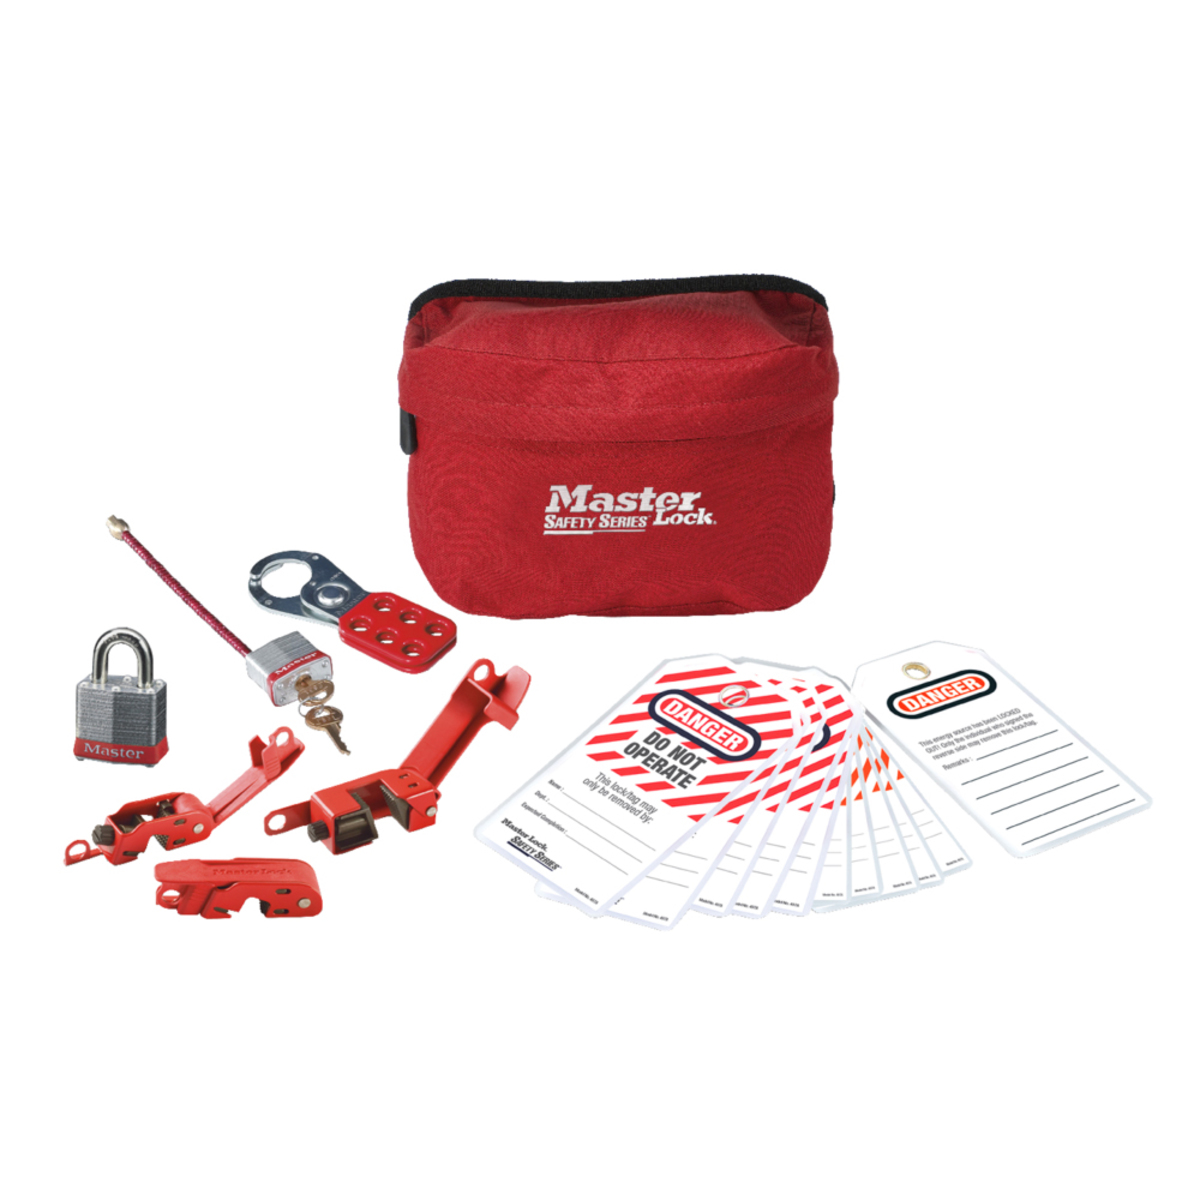 Master Lock® Red Laminated Steel Electrical Compact Lockout Pouch Kit Hardened Steel Shackle